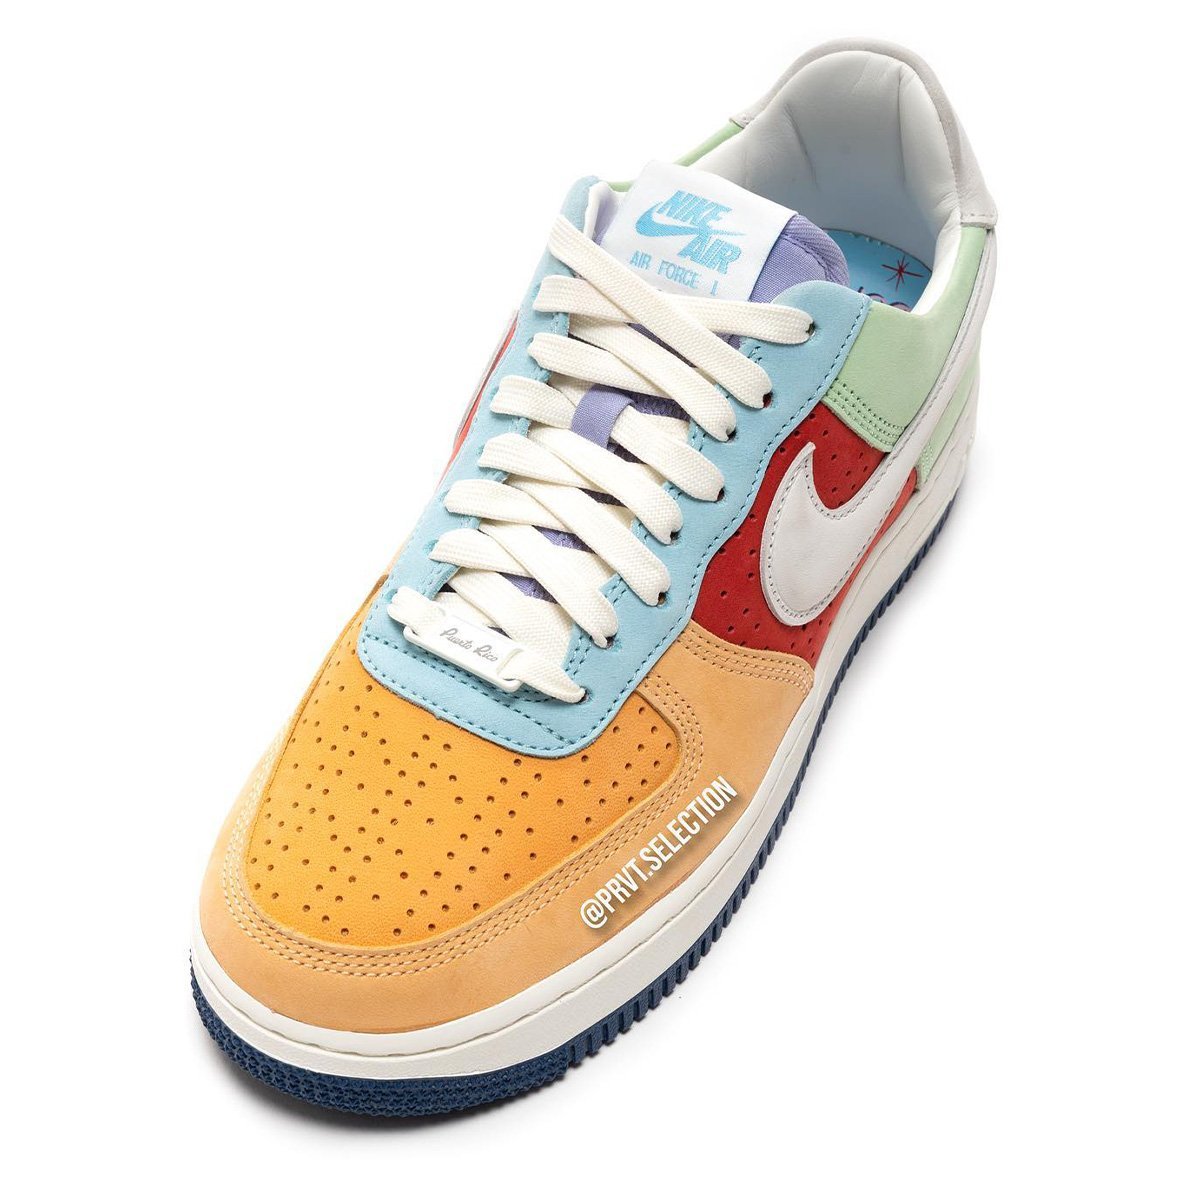 nike air force 1 low boricua puerto rico dx6504 900 release date info 3